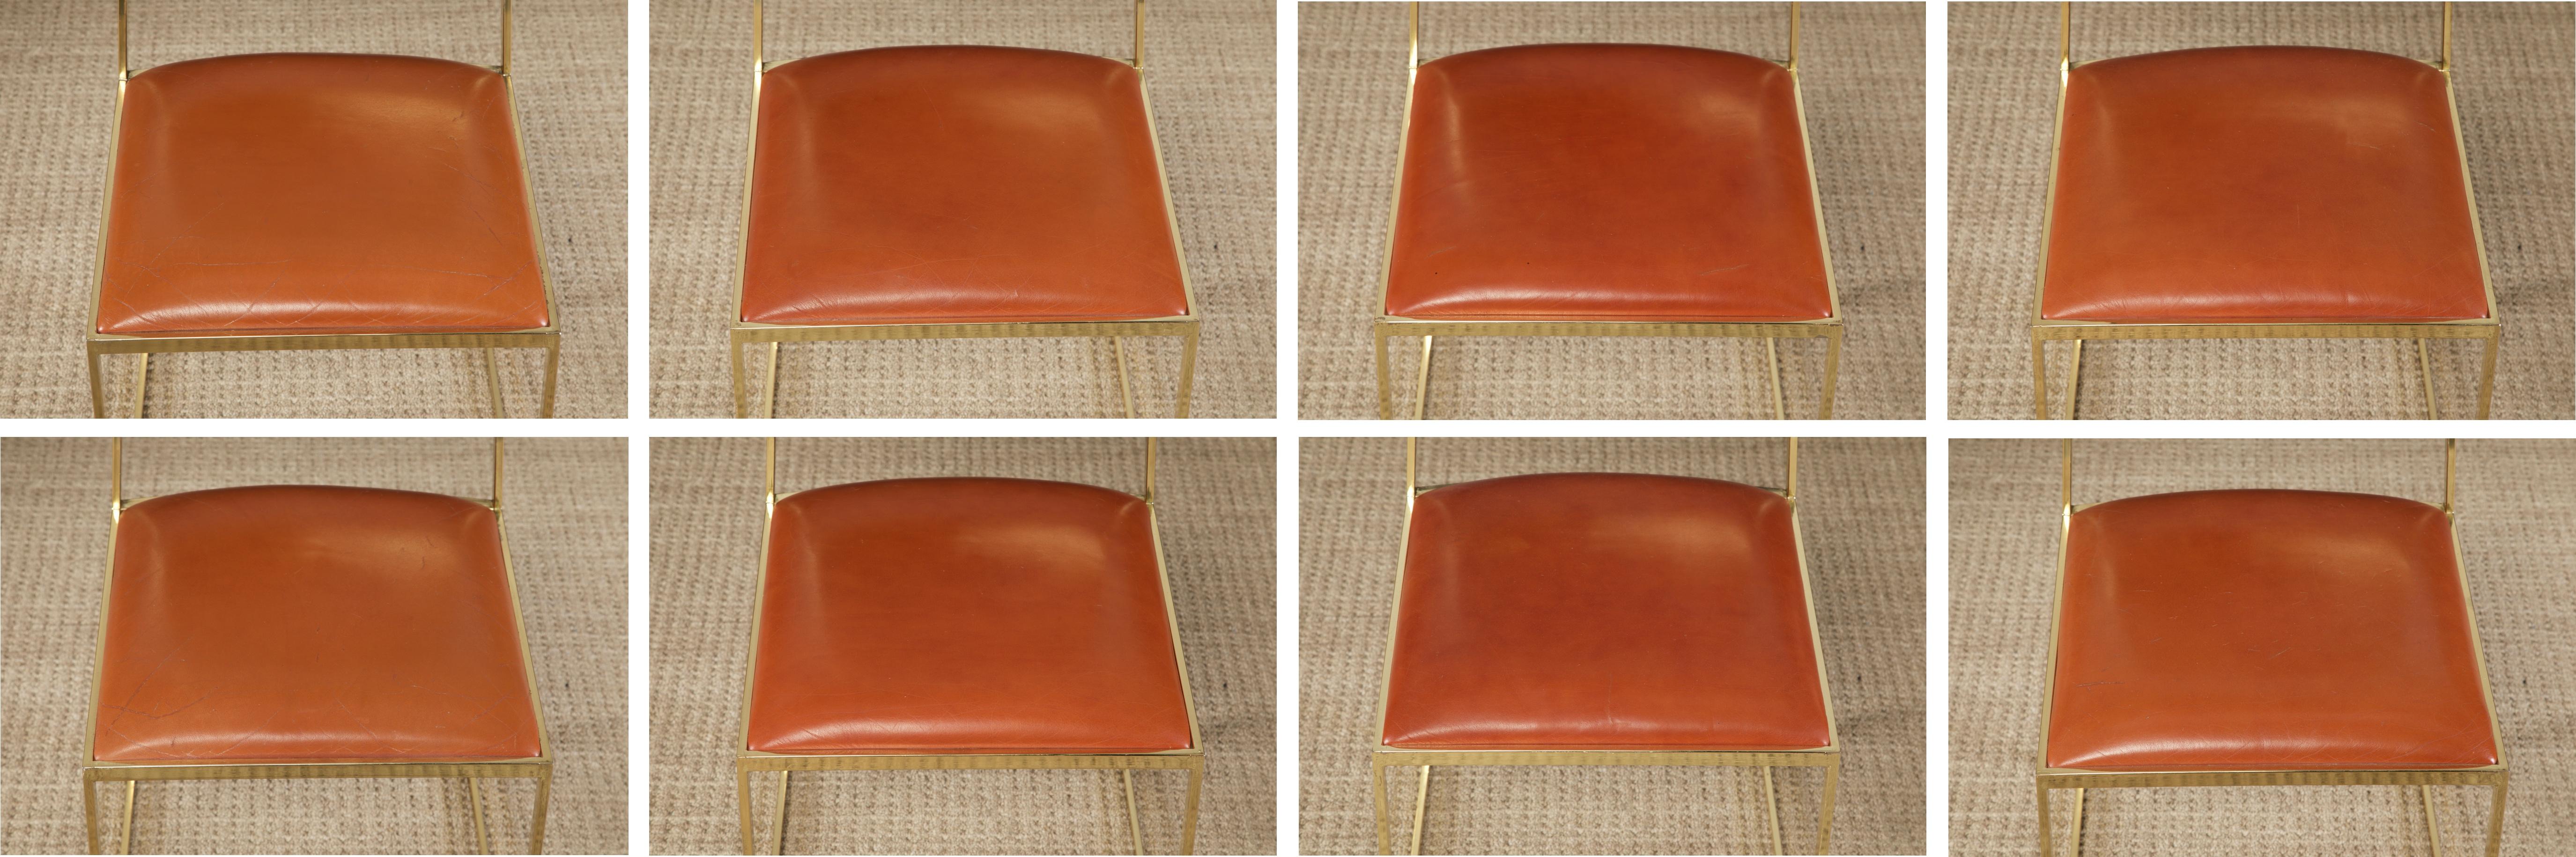 Willy Rizzo for Cidue Dining Chairs in Brass and Cognac Leather, c 1970, Signed 2